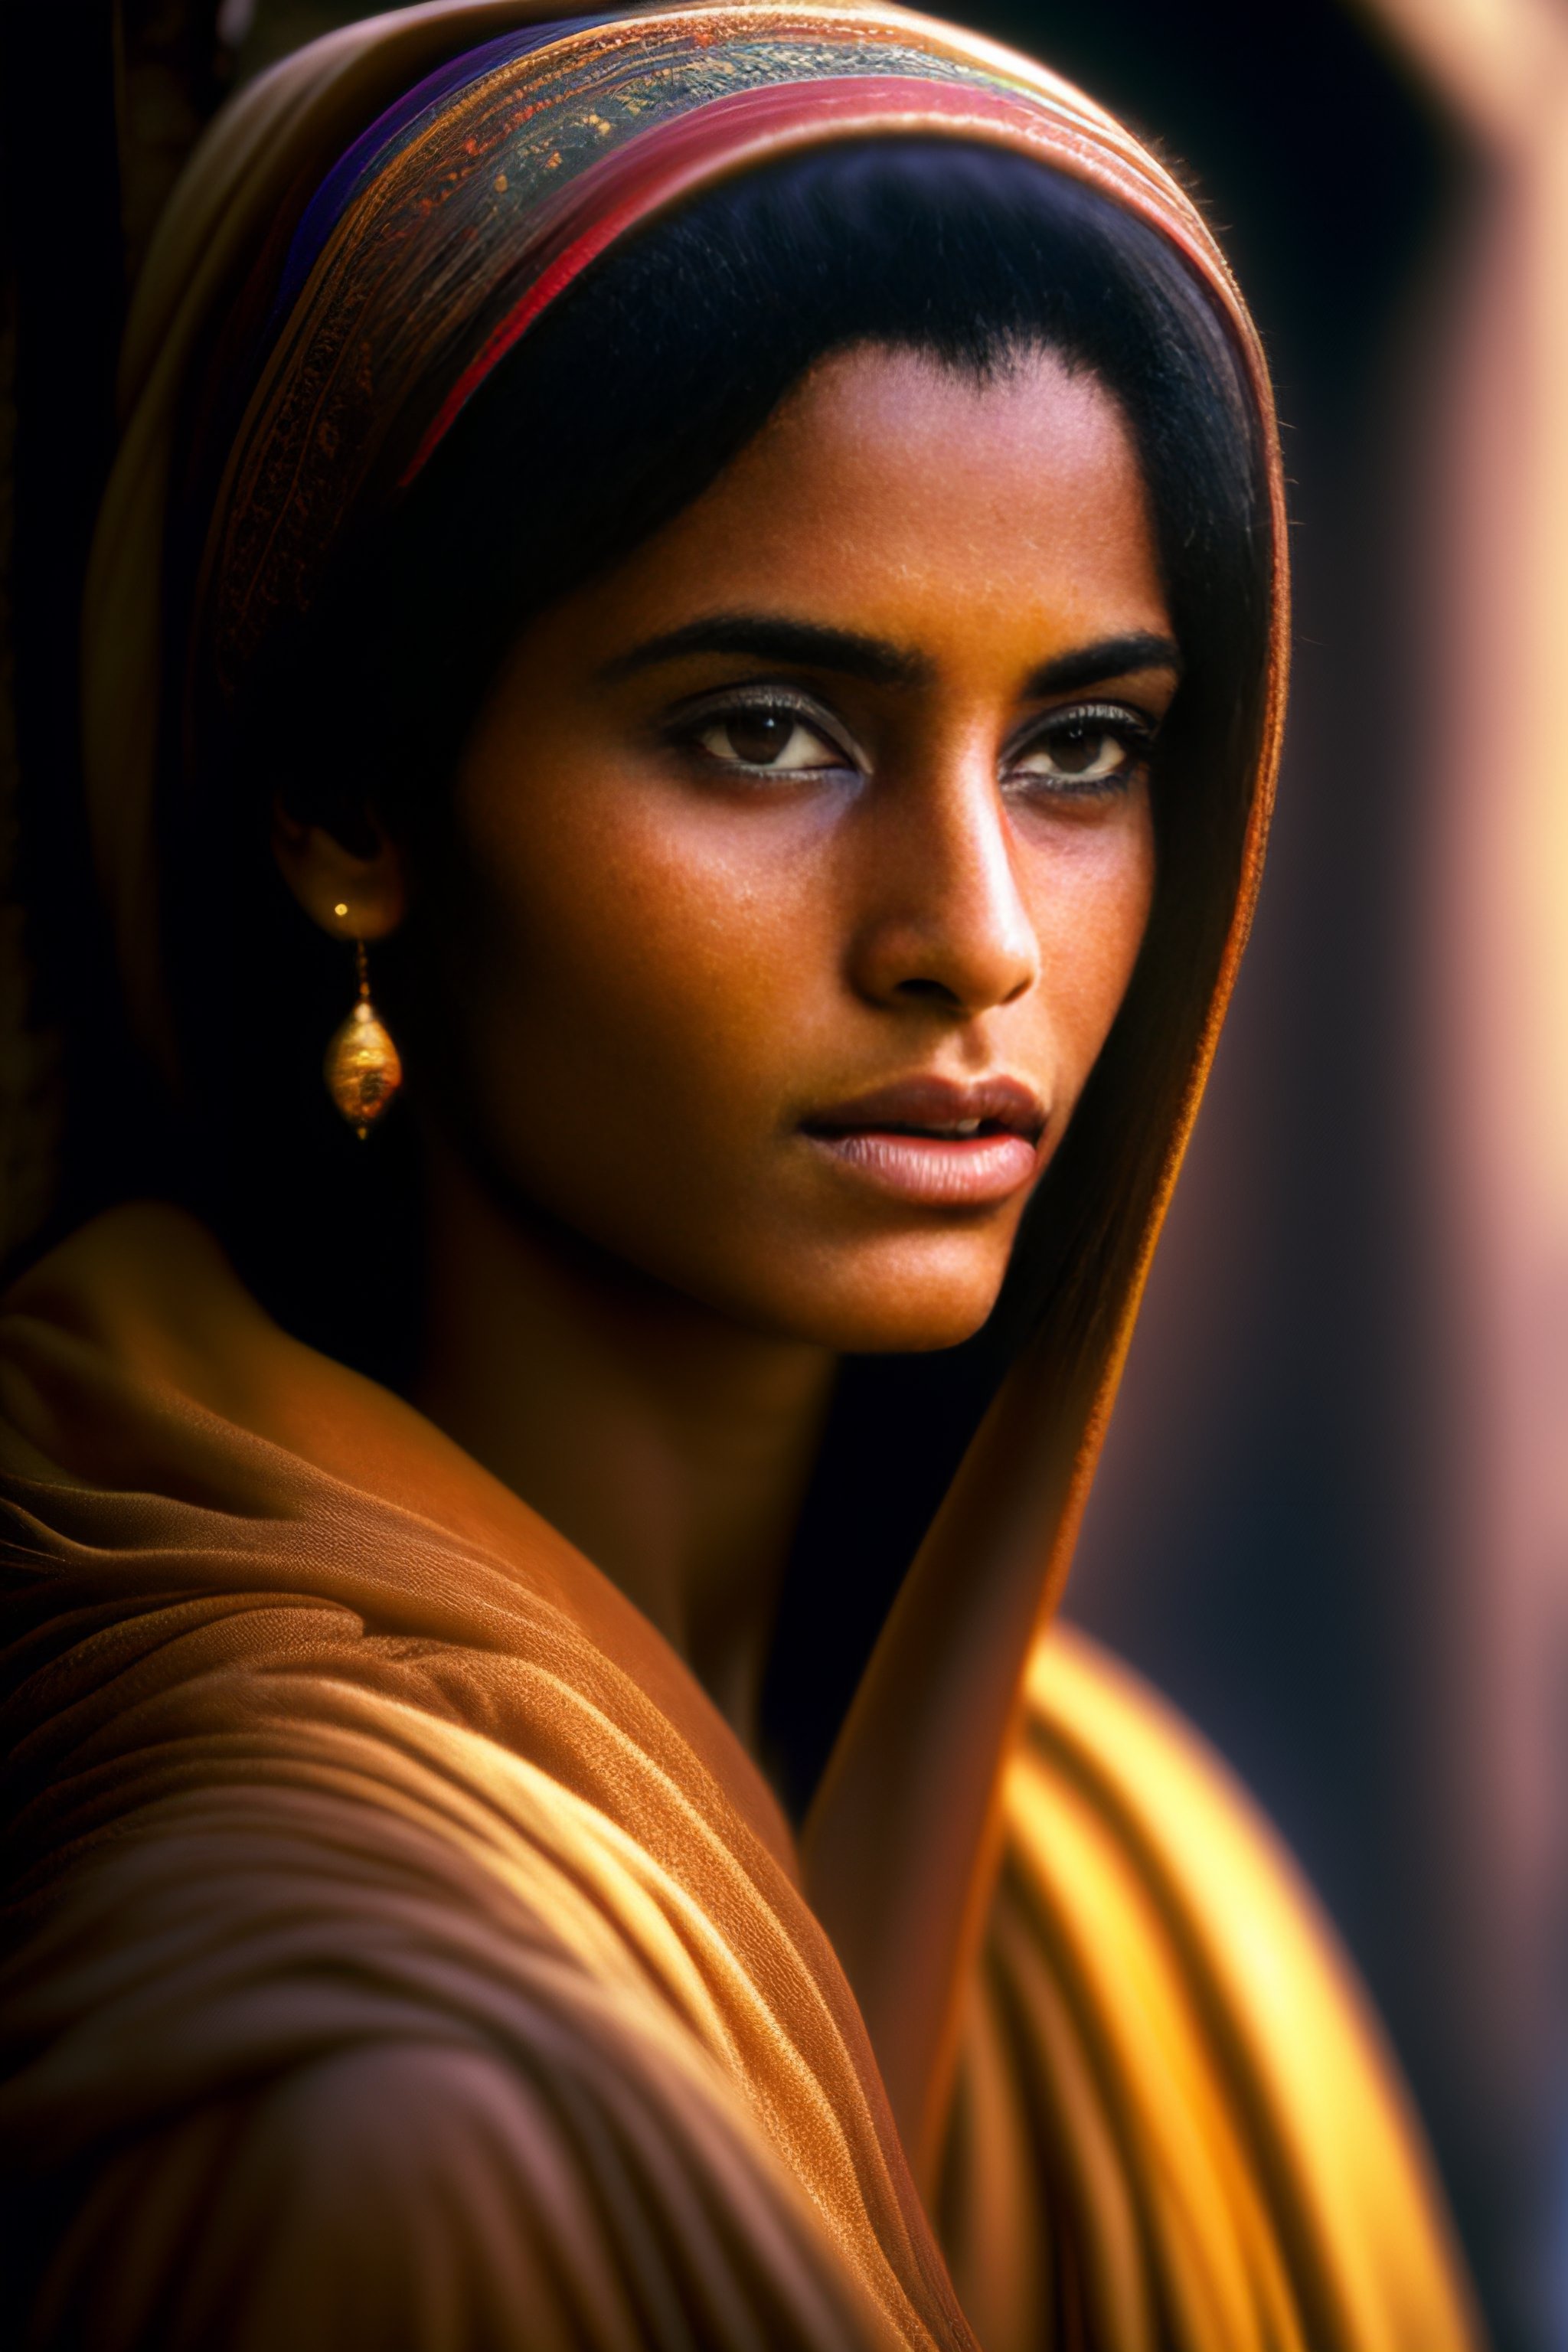 Lexica Award Winning Photo Titled “19 Year Old Woman“ By Steve Mccurry 35mm F28 Insanely 